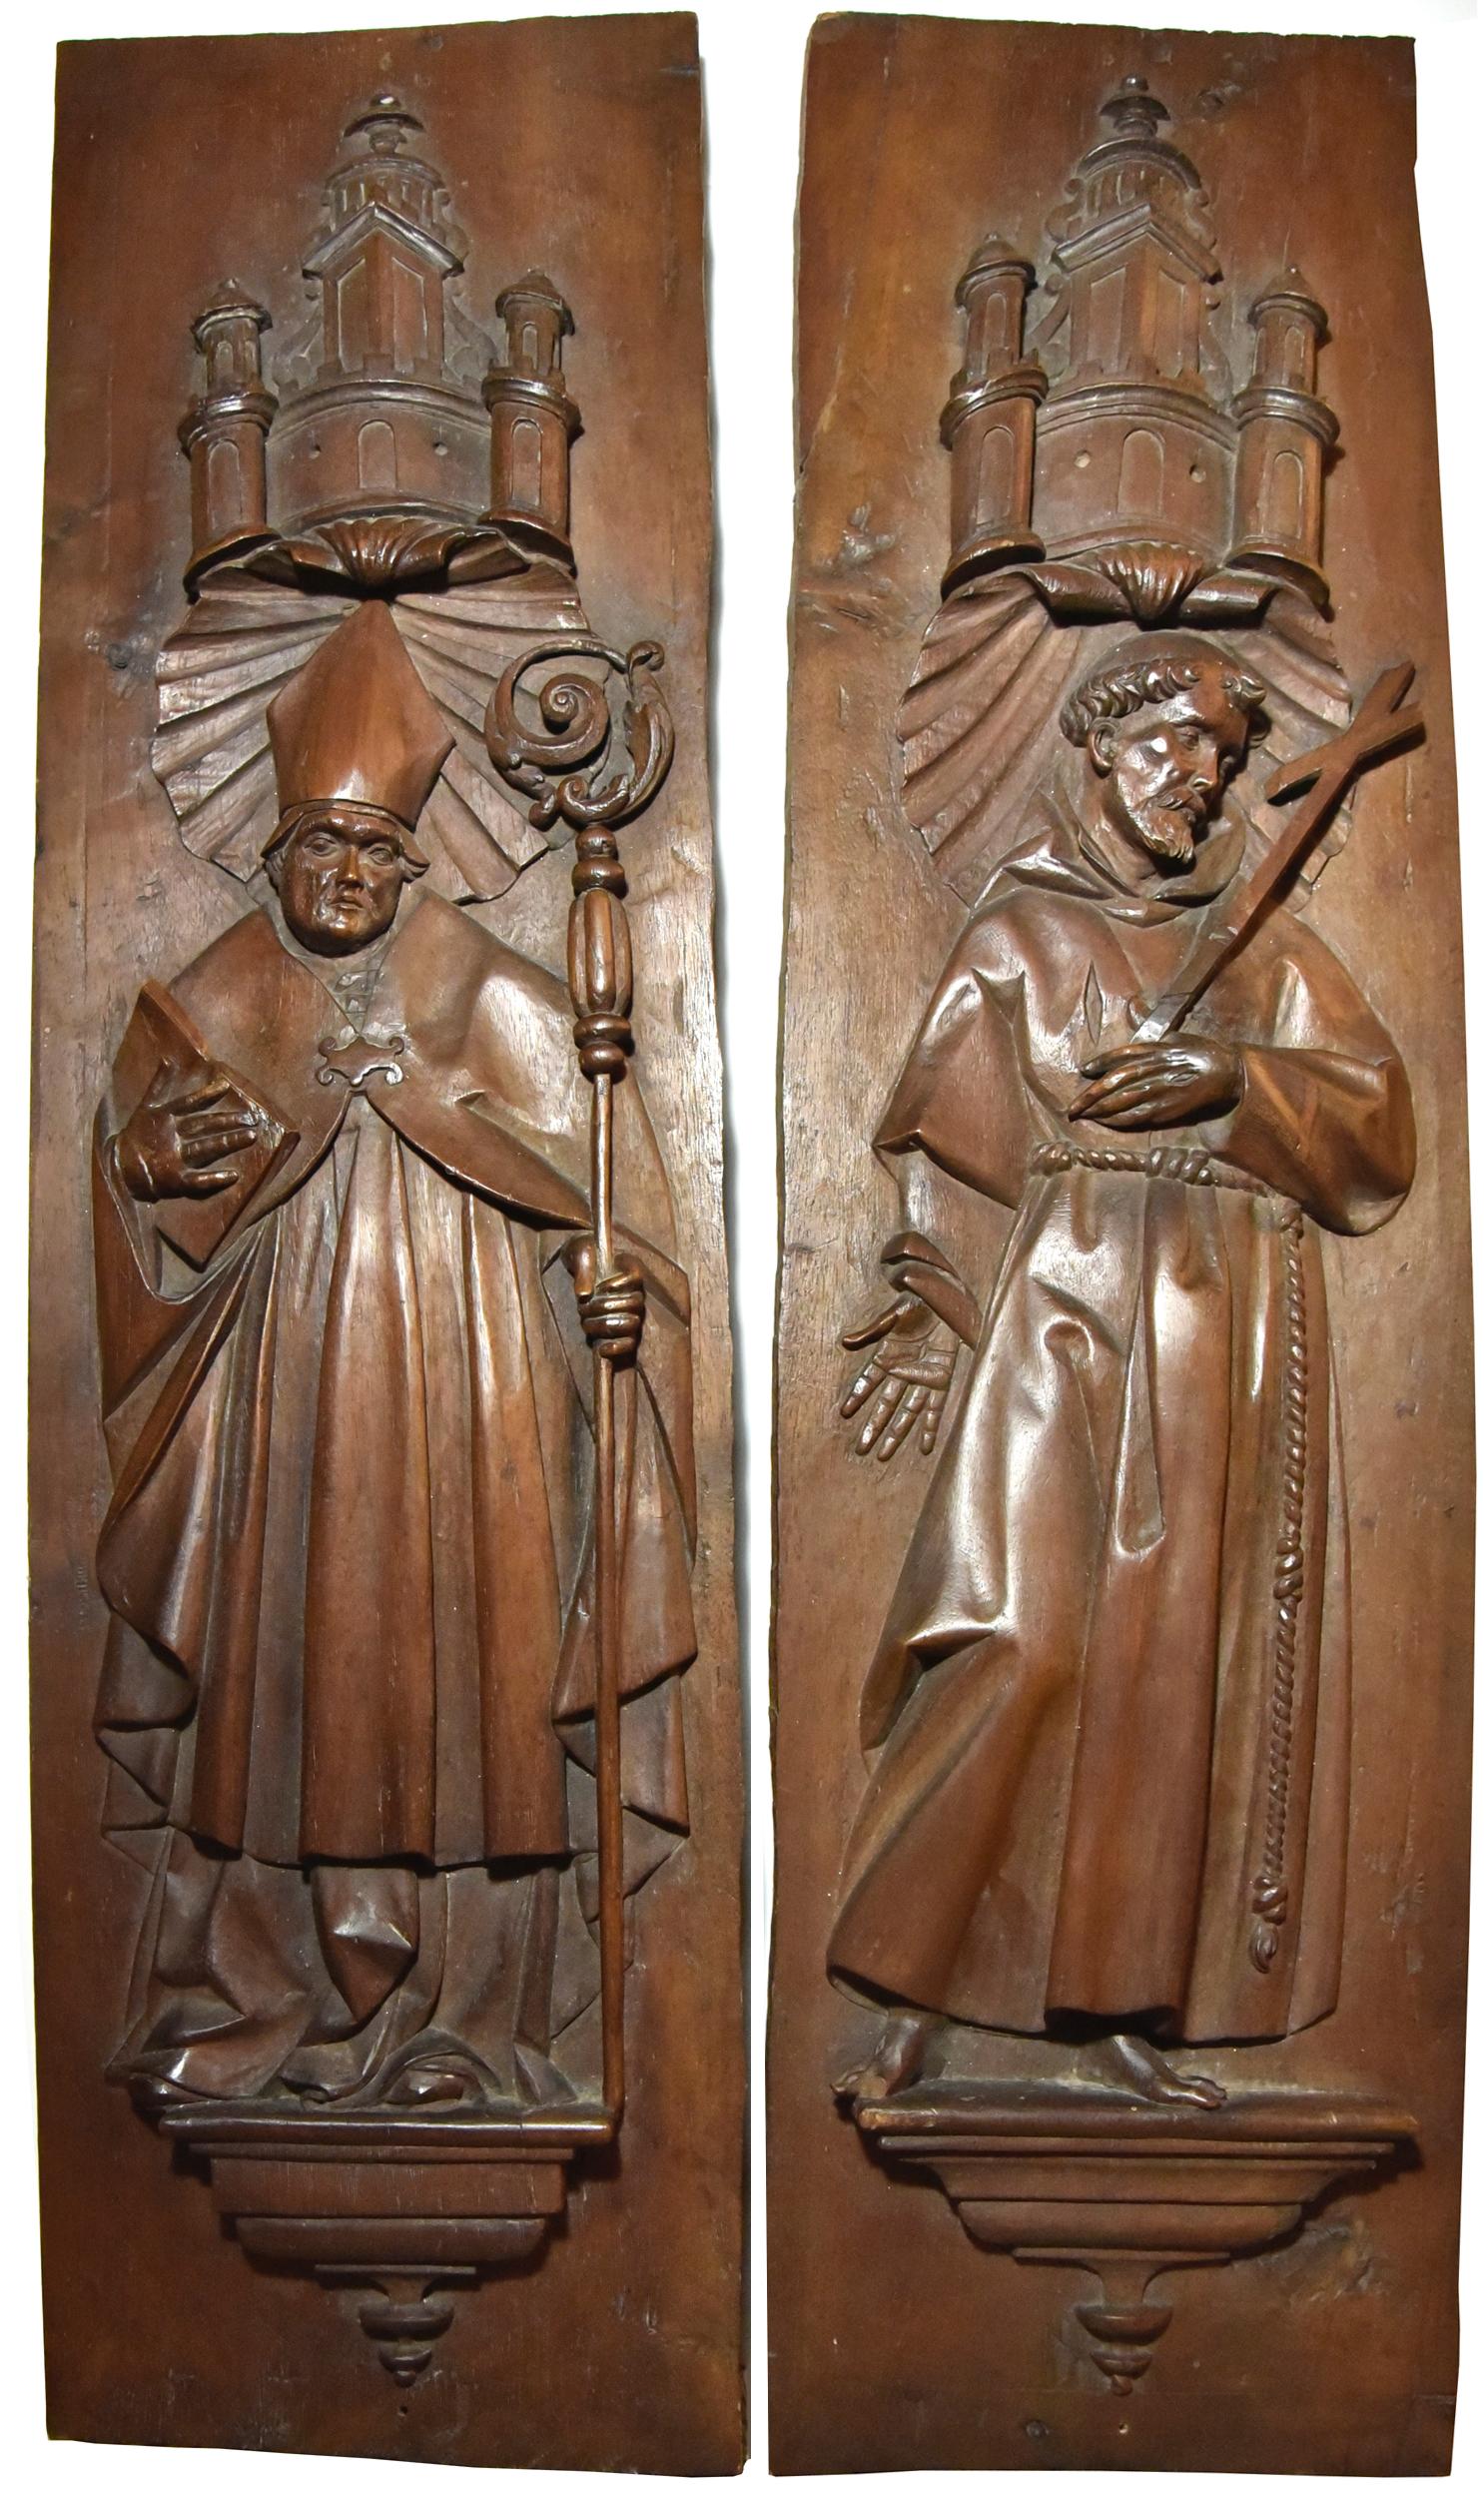 Unknown Figurative Sculpture - Stall panels around 1600, Bishop and St. Francis of Assisi